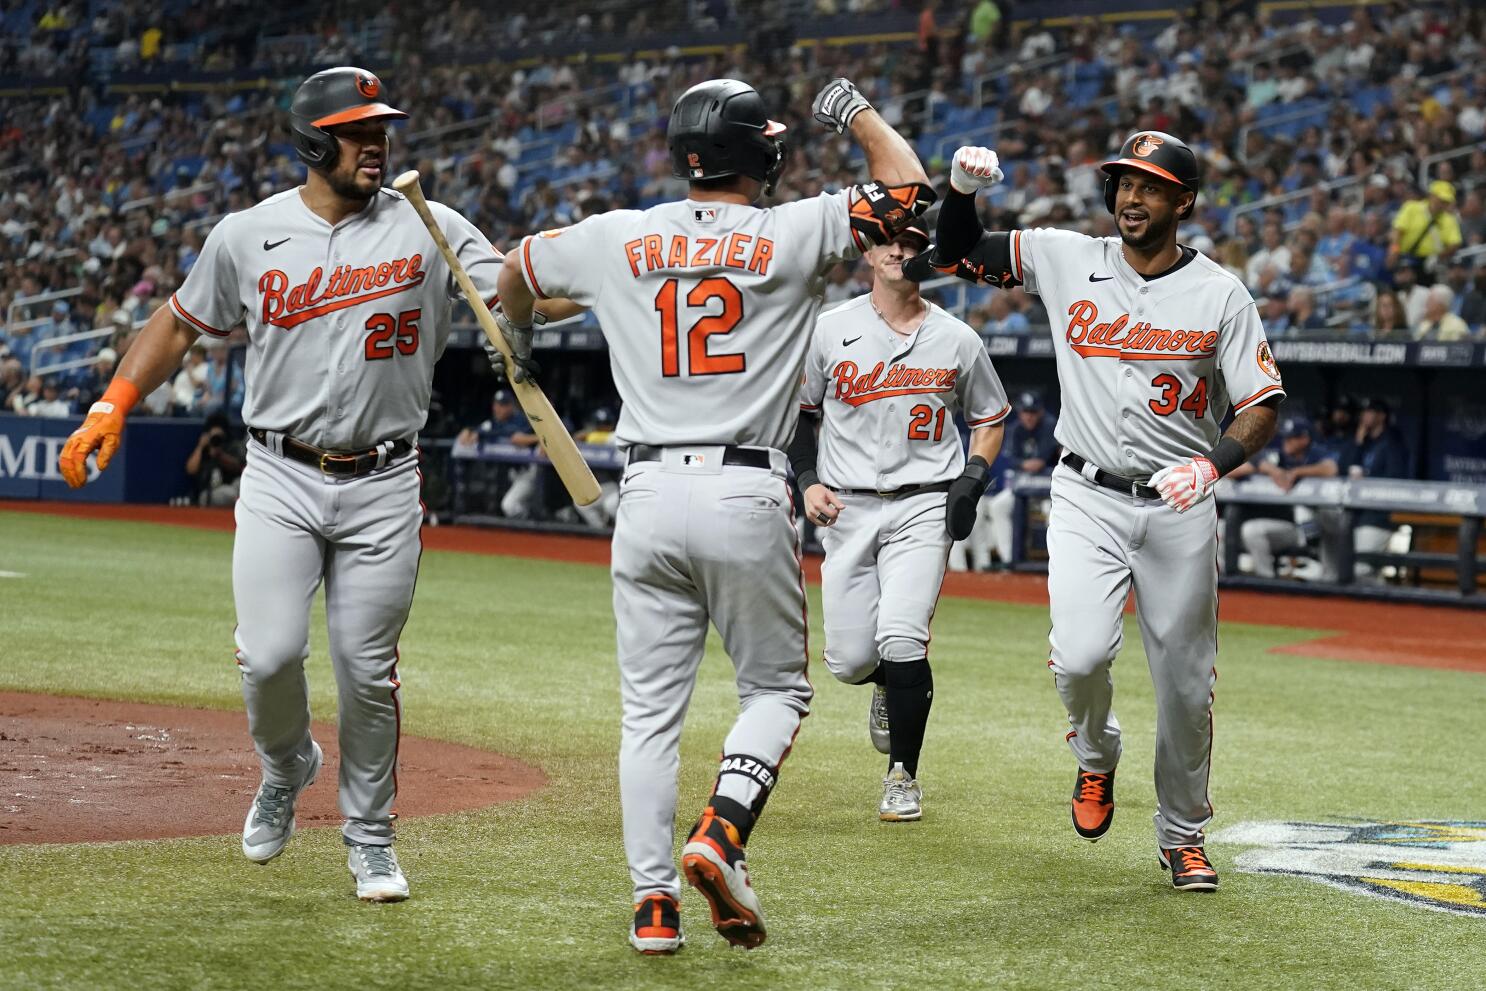 Hicks homers and drives in 4 as the Orioles beat the Rays 8-6